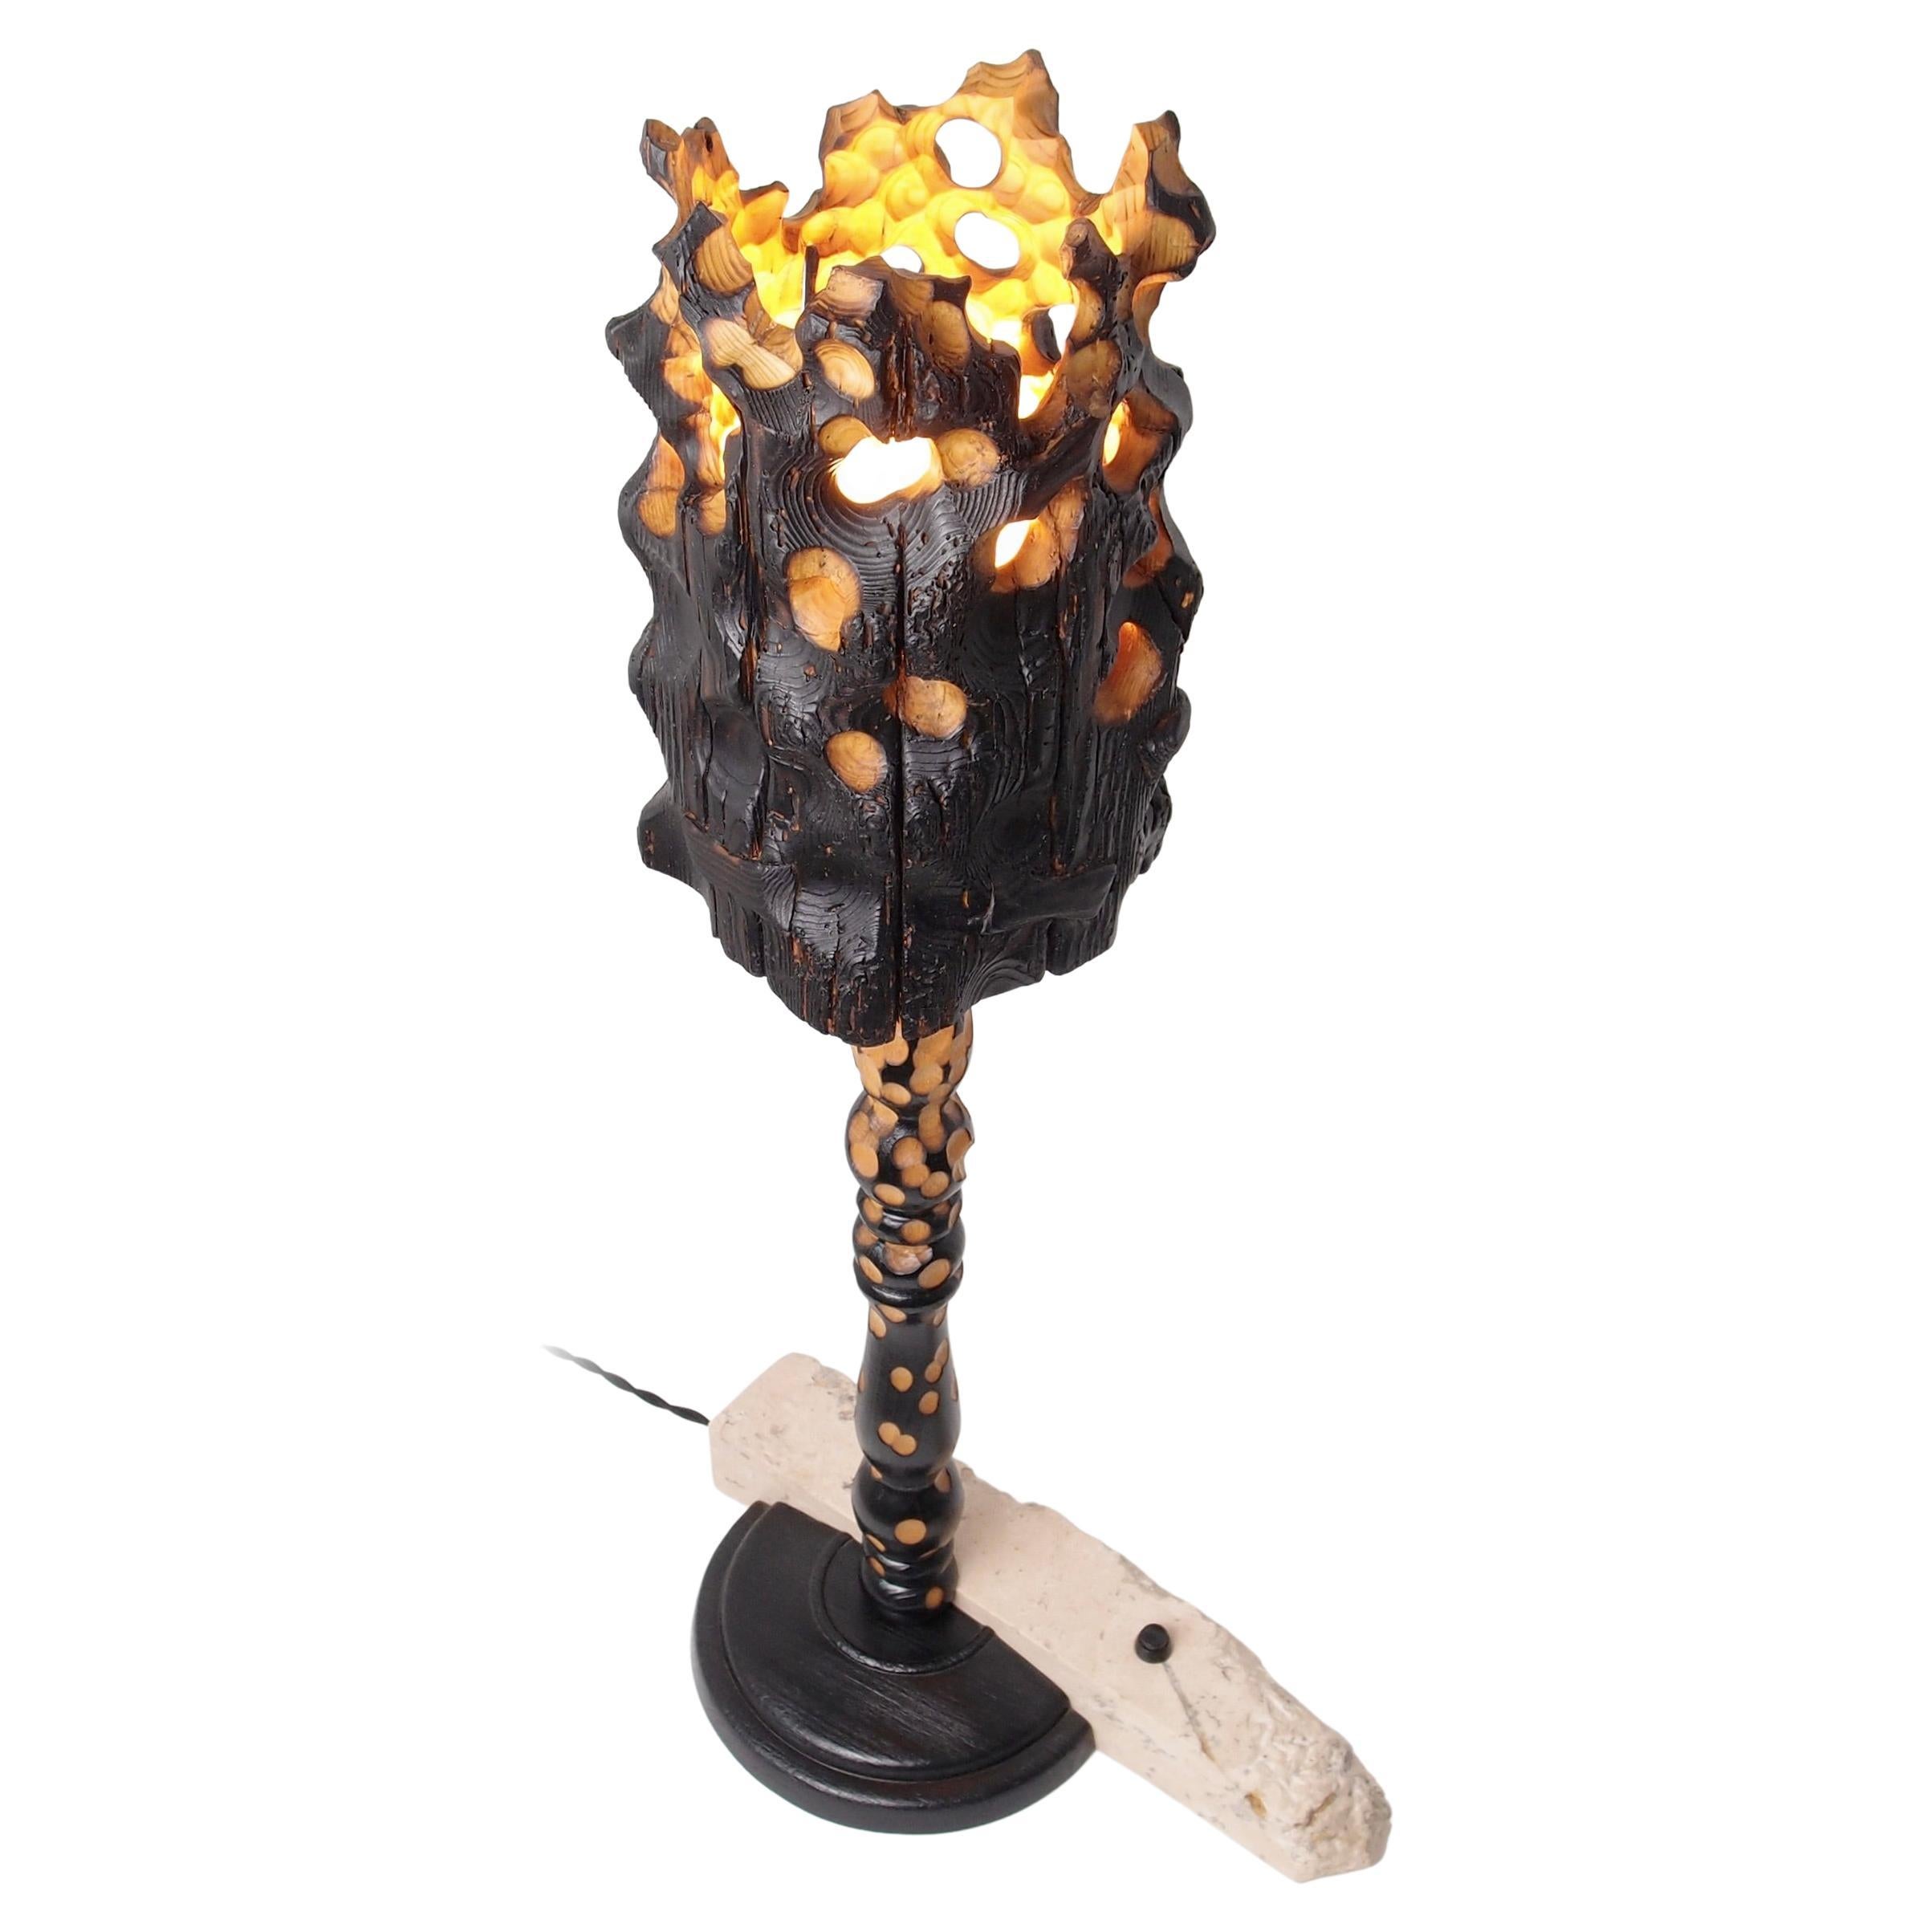 Torch, Sculptured Lighting, Table Lamp from Reclaimed Burned Wood and Stone